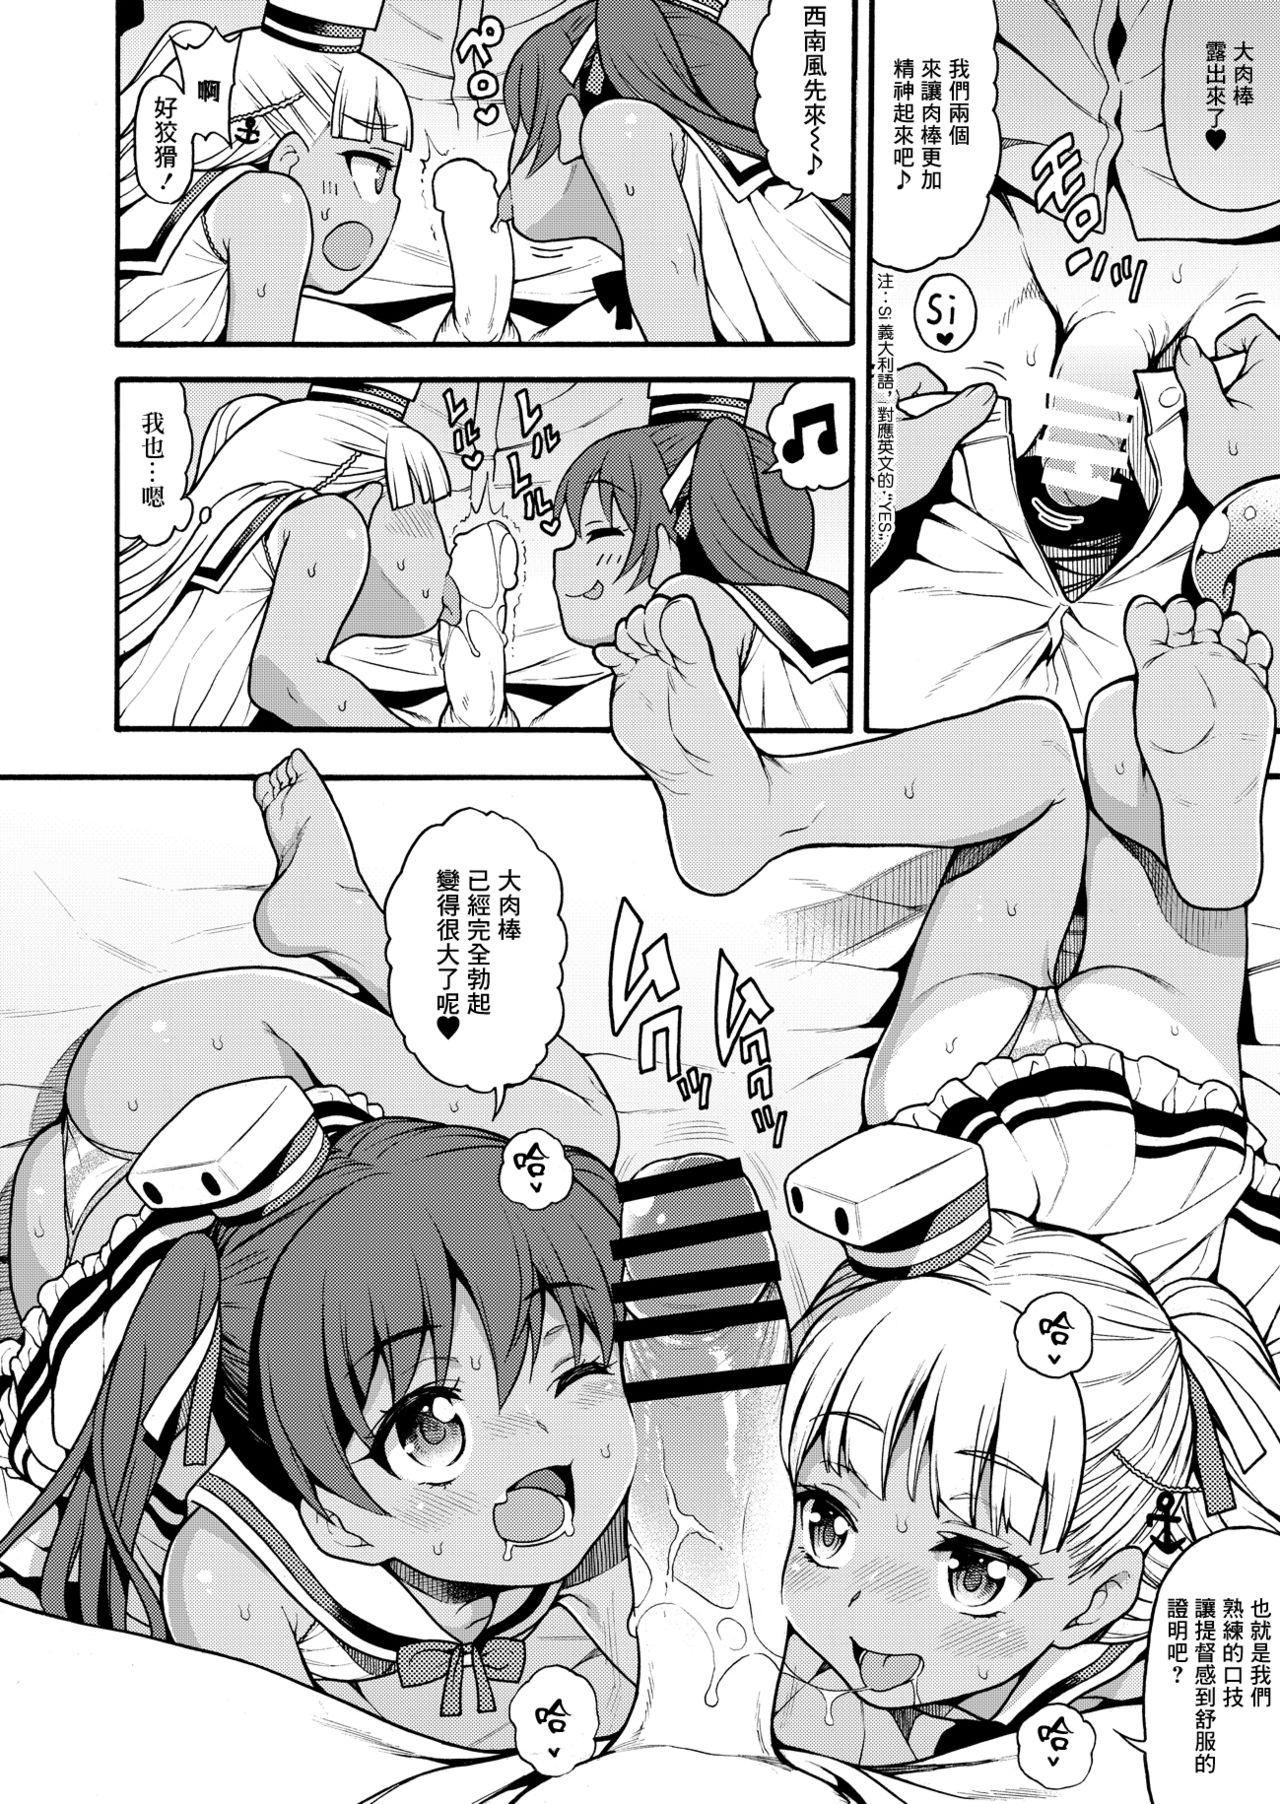 Juicy Ciao Ciao Buon Appetito - Kantai collection Style - Page 6